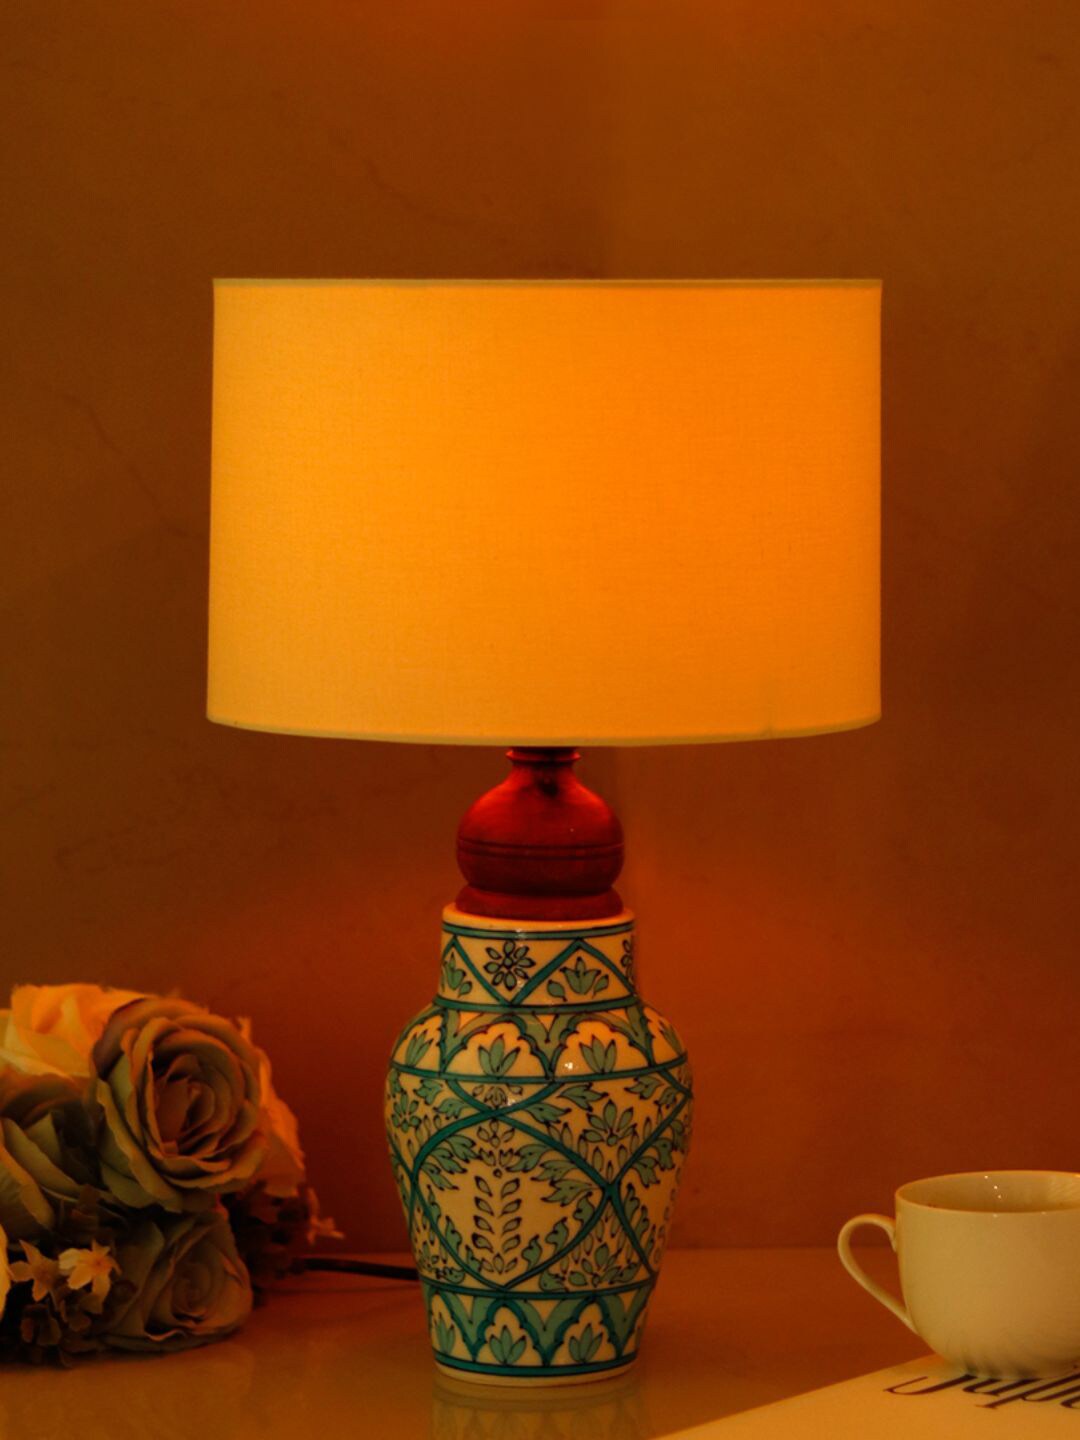 Unravel India Blue Pottery Mugal Art Matka Ceramic Decorative Table Lamp with Shade Price in India